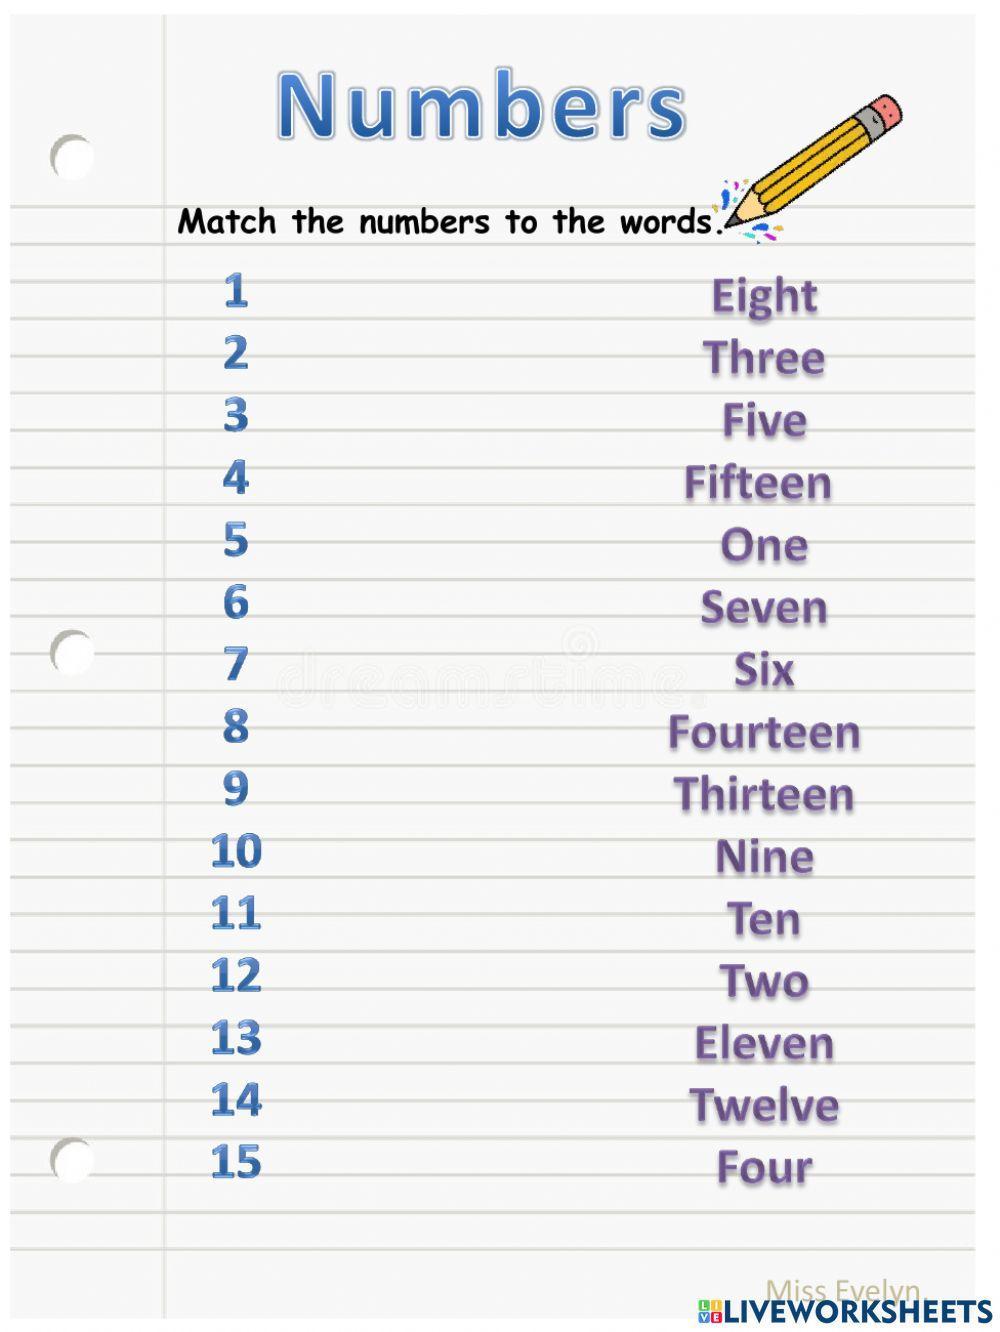 Numbers from 1 to 15